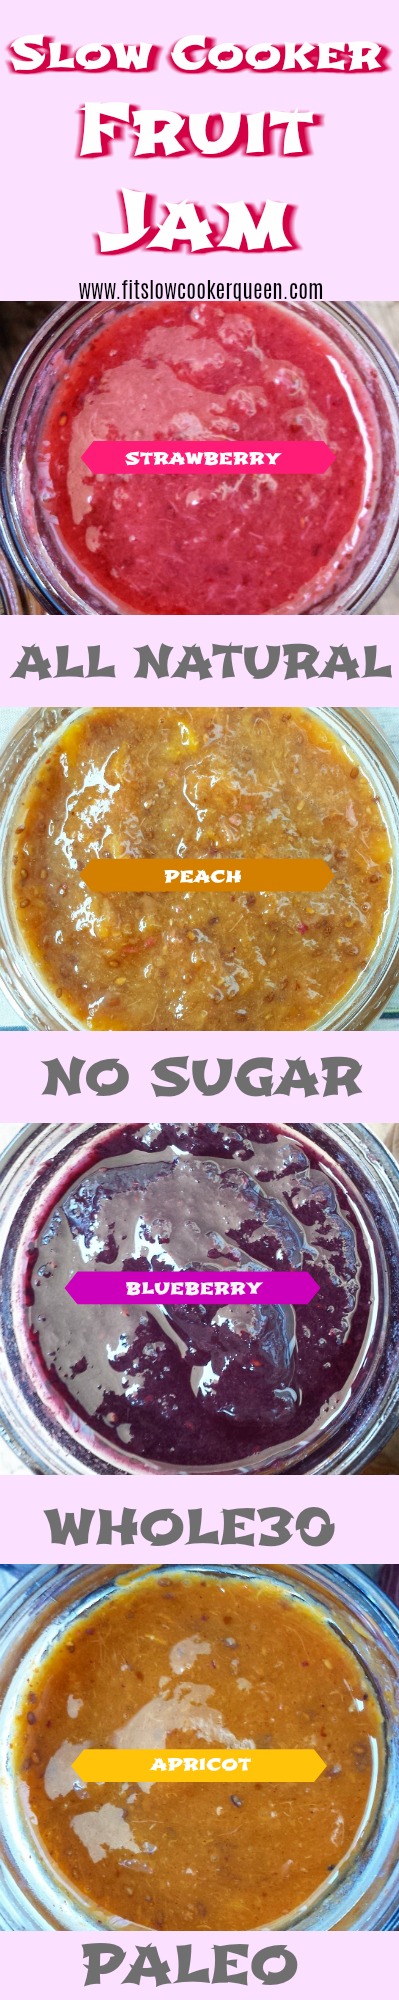 This fruit jam slow cooker recipe contains no added sugar! It's healthy being paleo and whole30 compliant and quick cooking in just a couple hours.